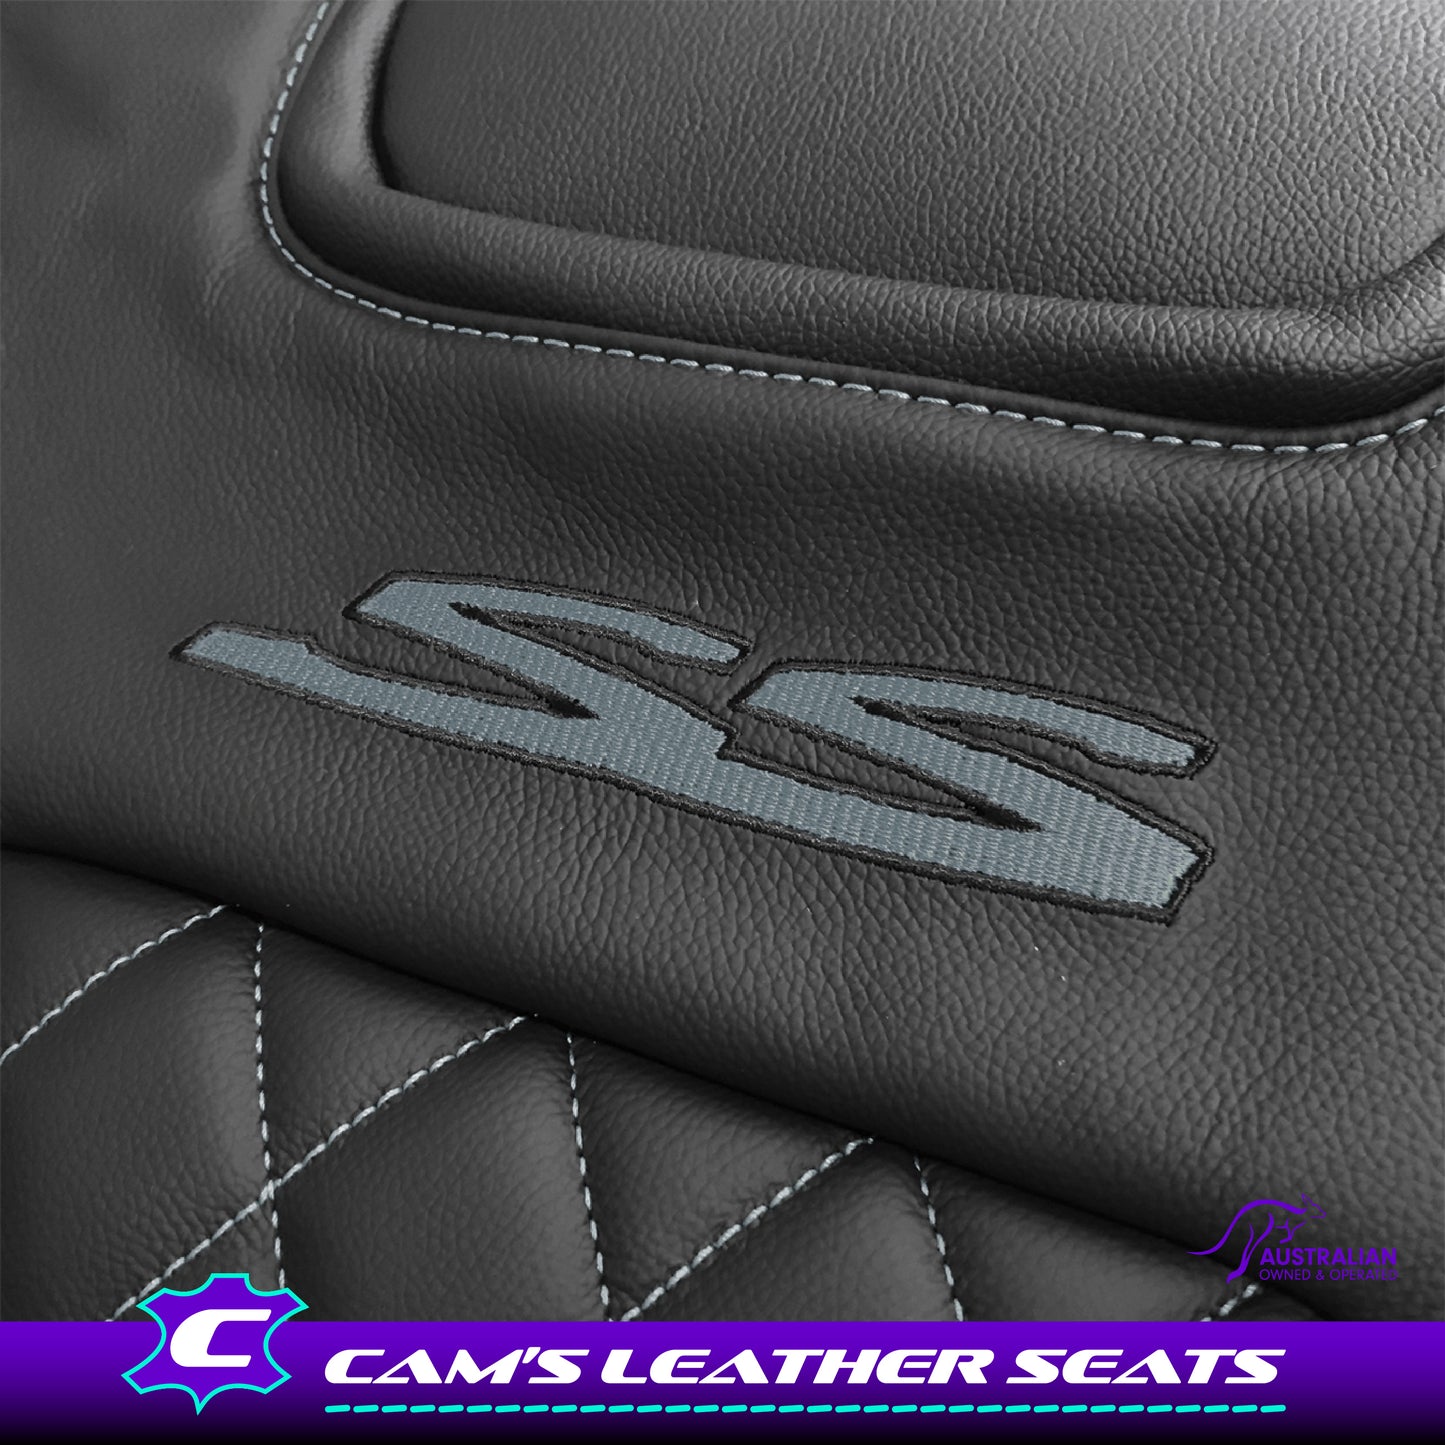 LEATHER SEATS TRIM KIT FOR HOLDEN VE SS UTE DIAMOND STITCH INSERTS CHOOSE COLOUR